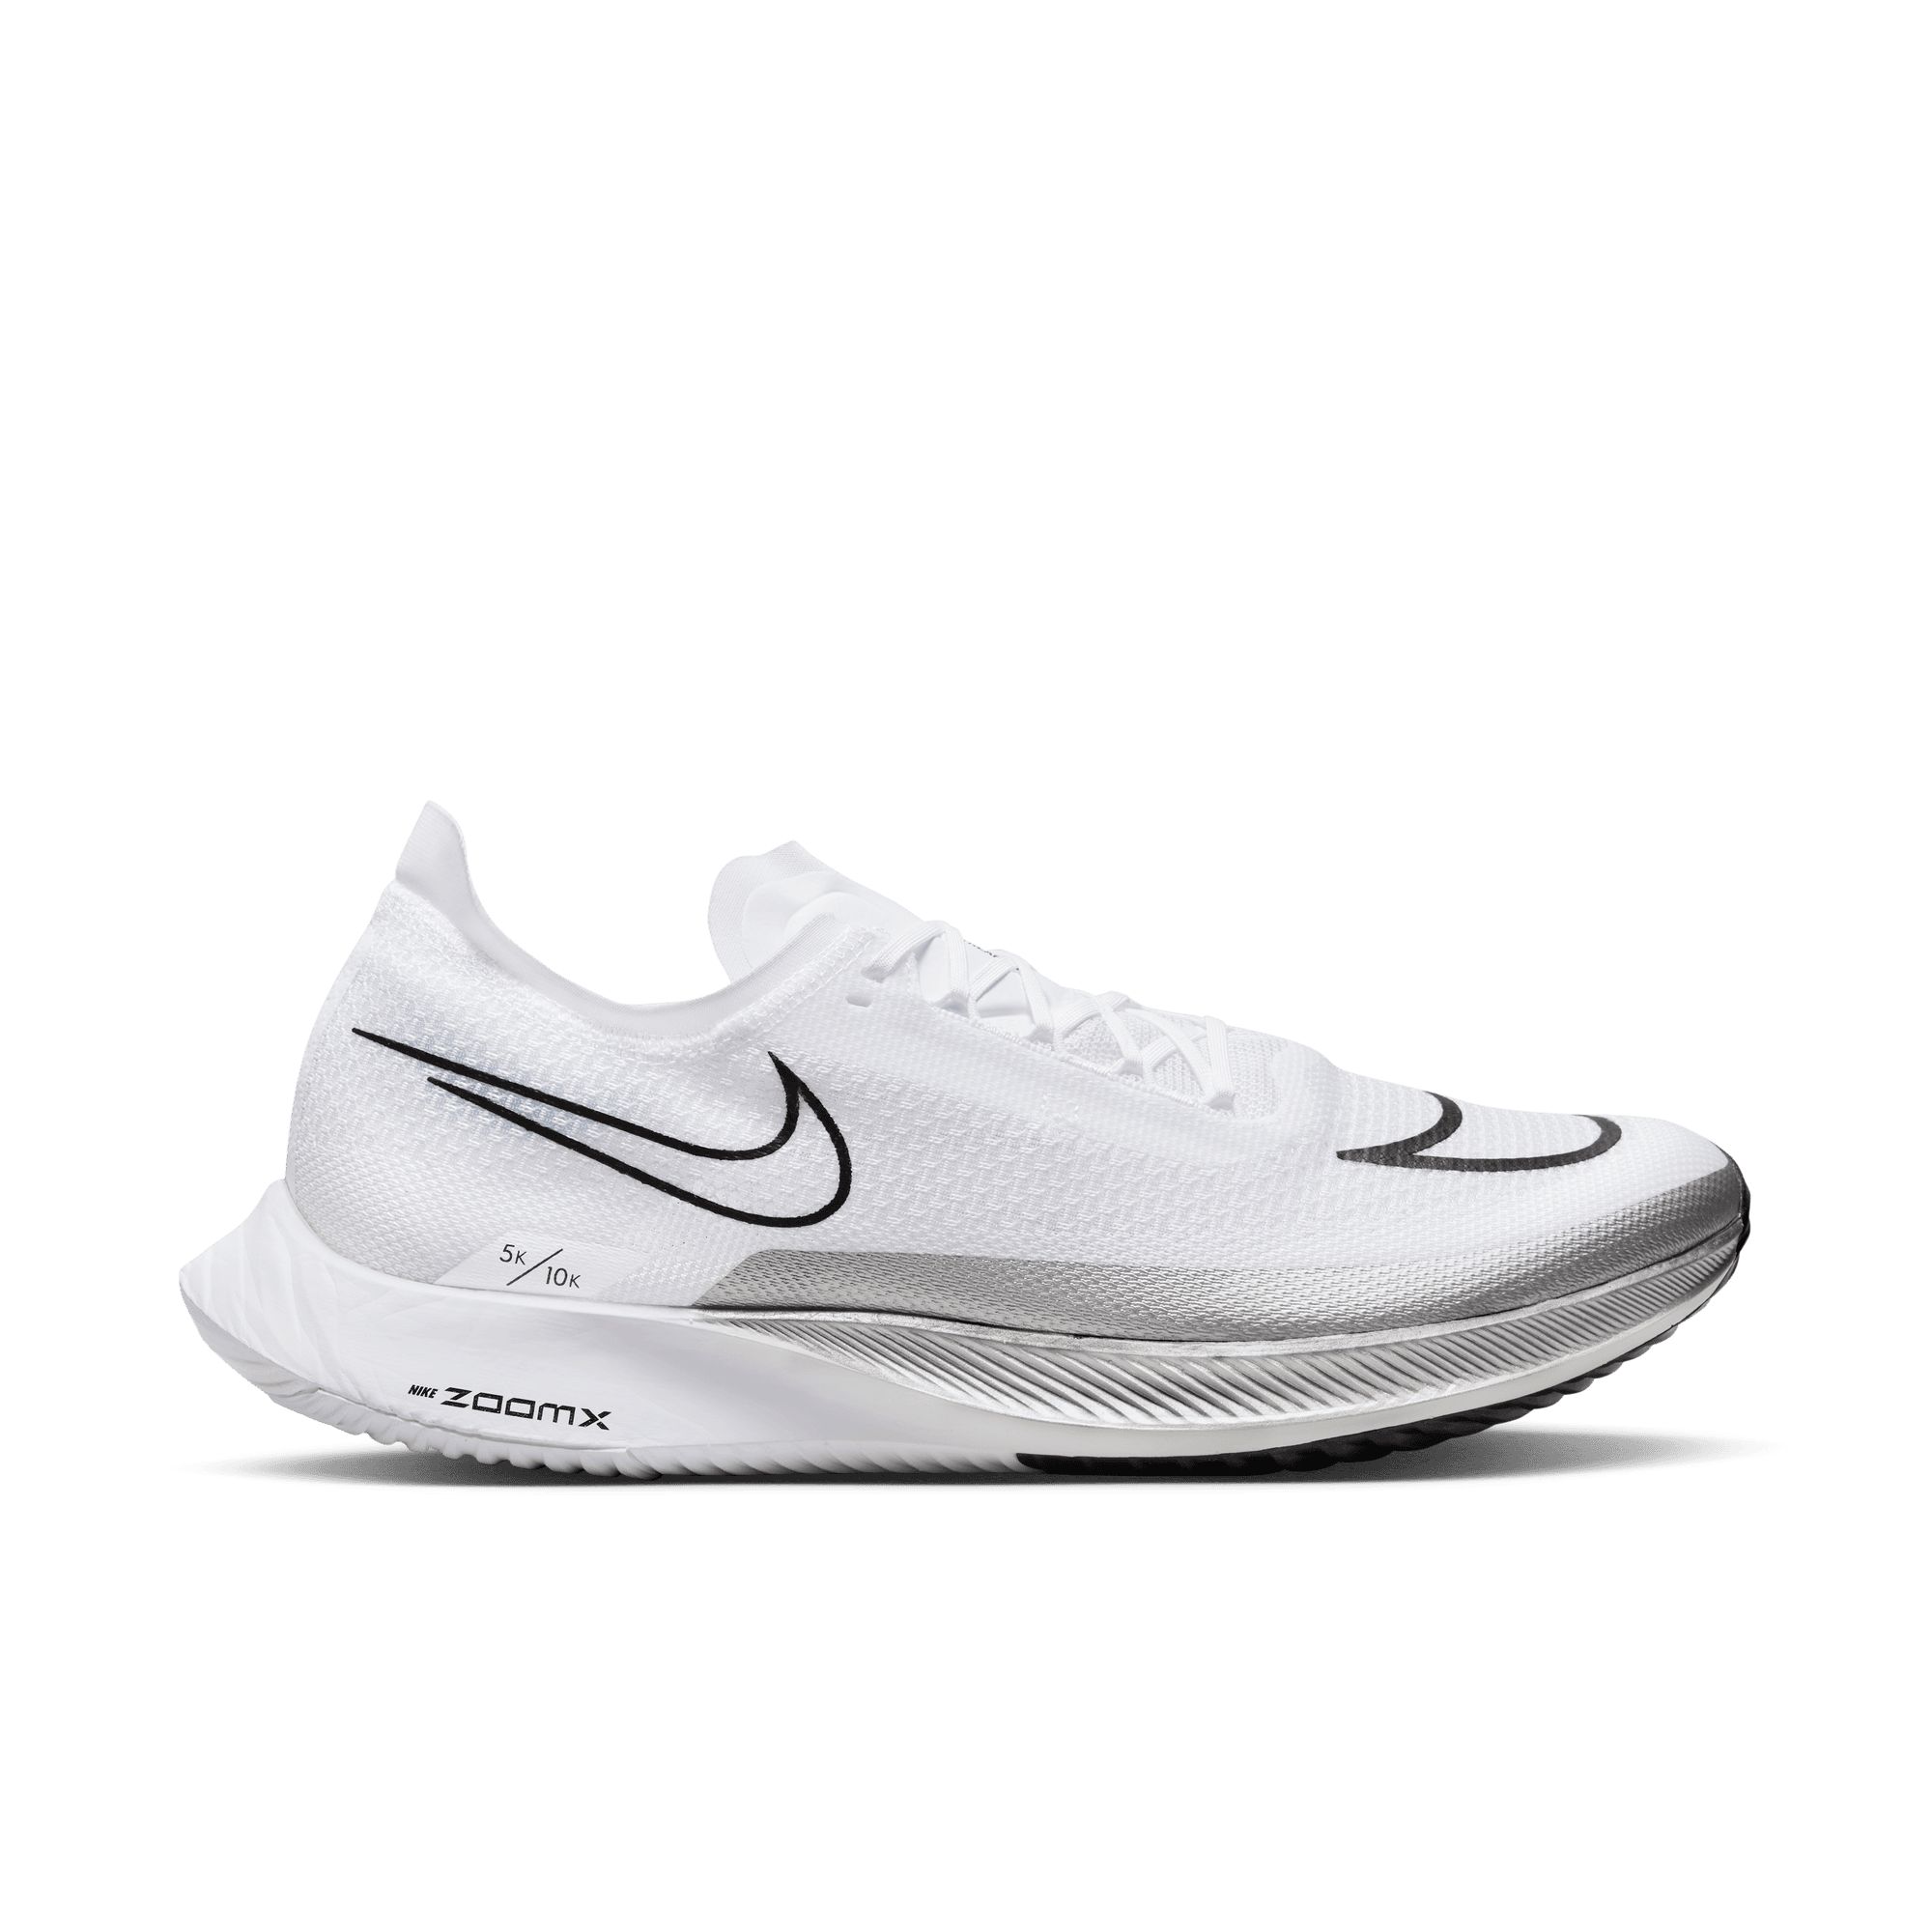 Nike Men's ZoomX Streakfly Running Shoes